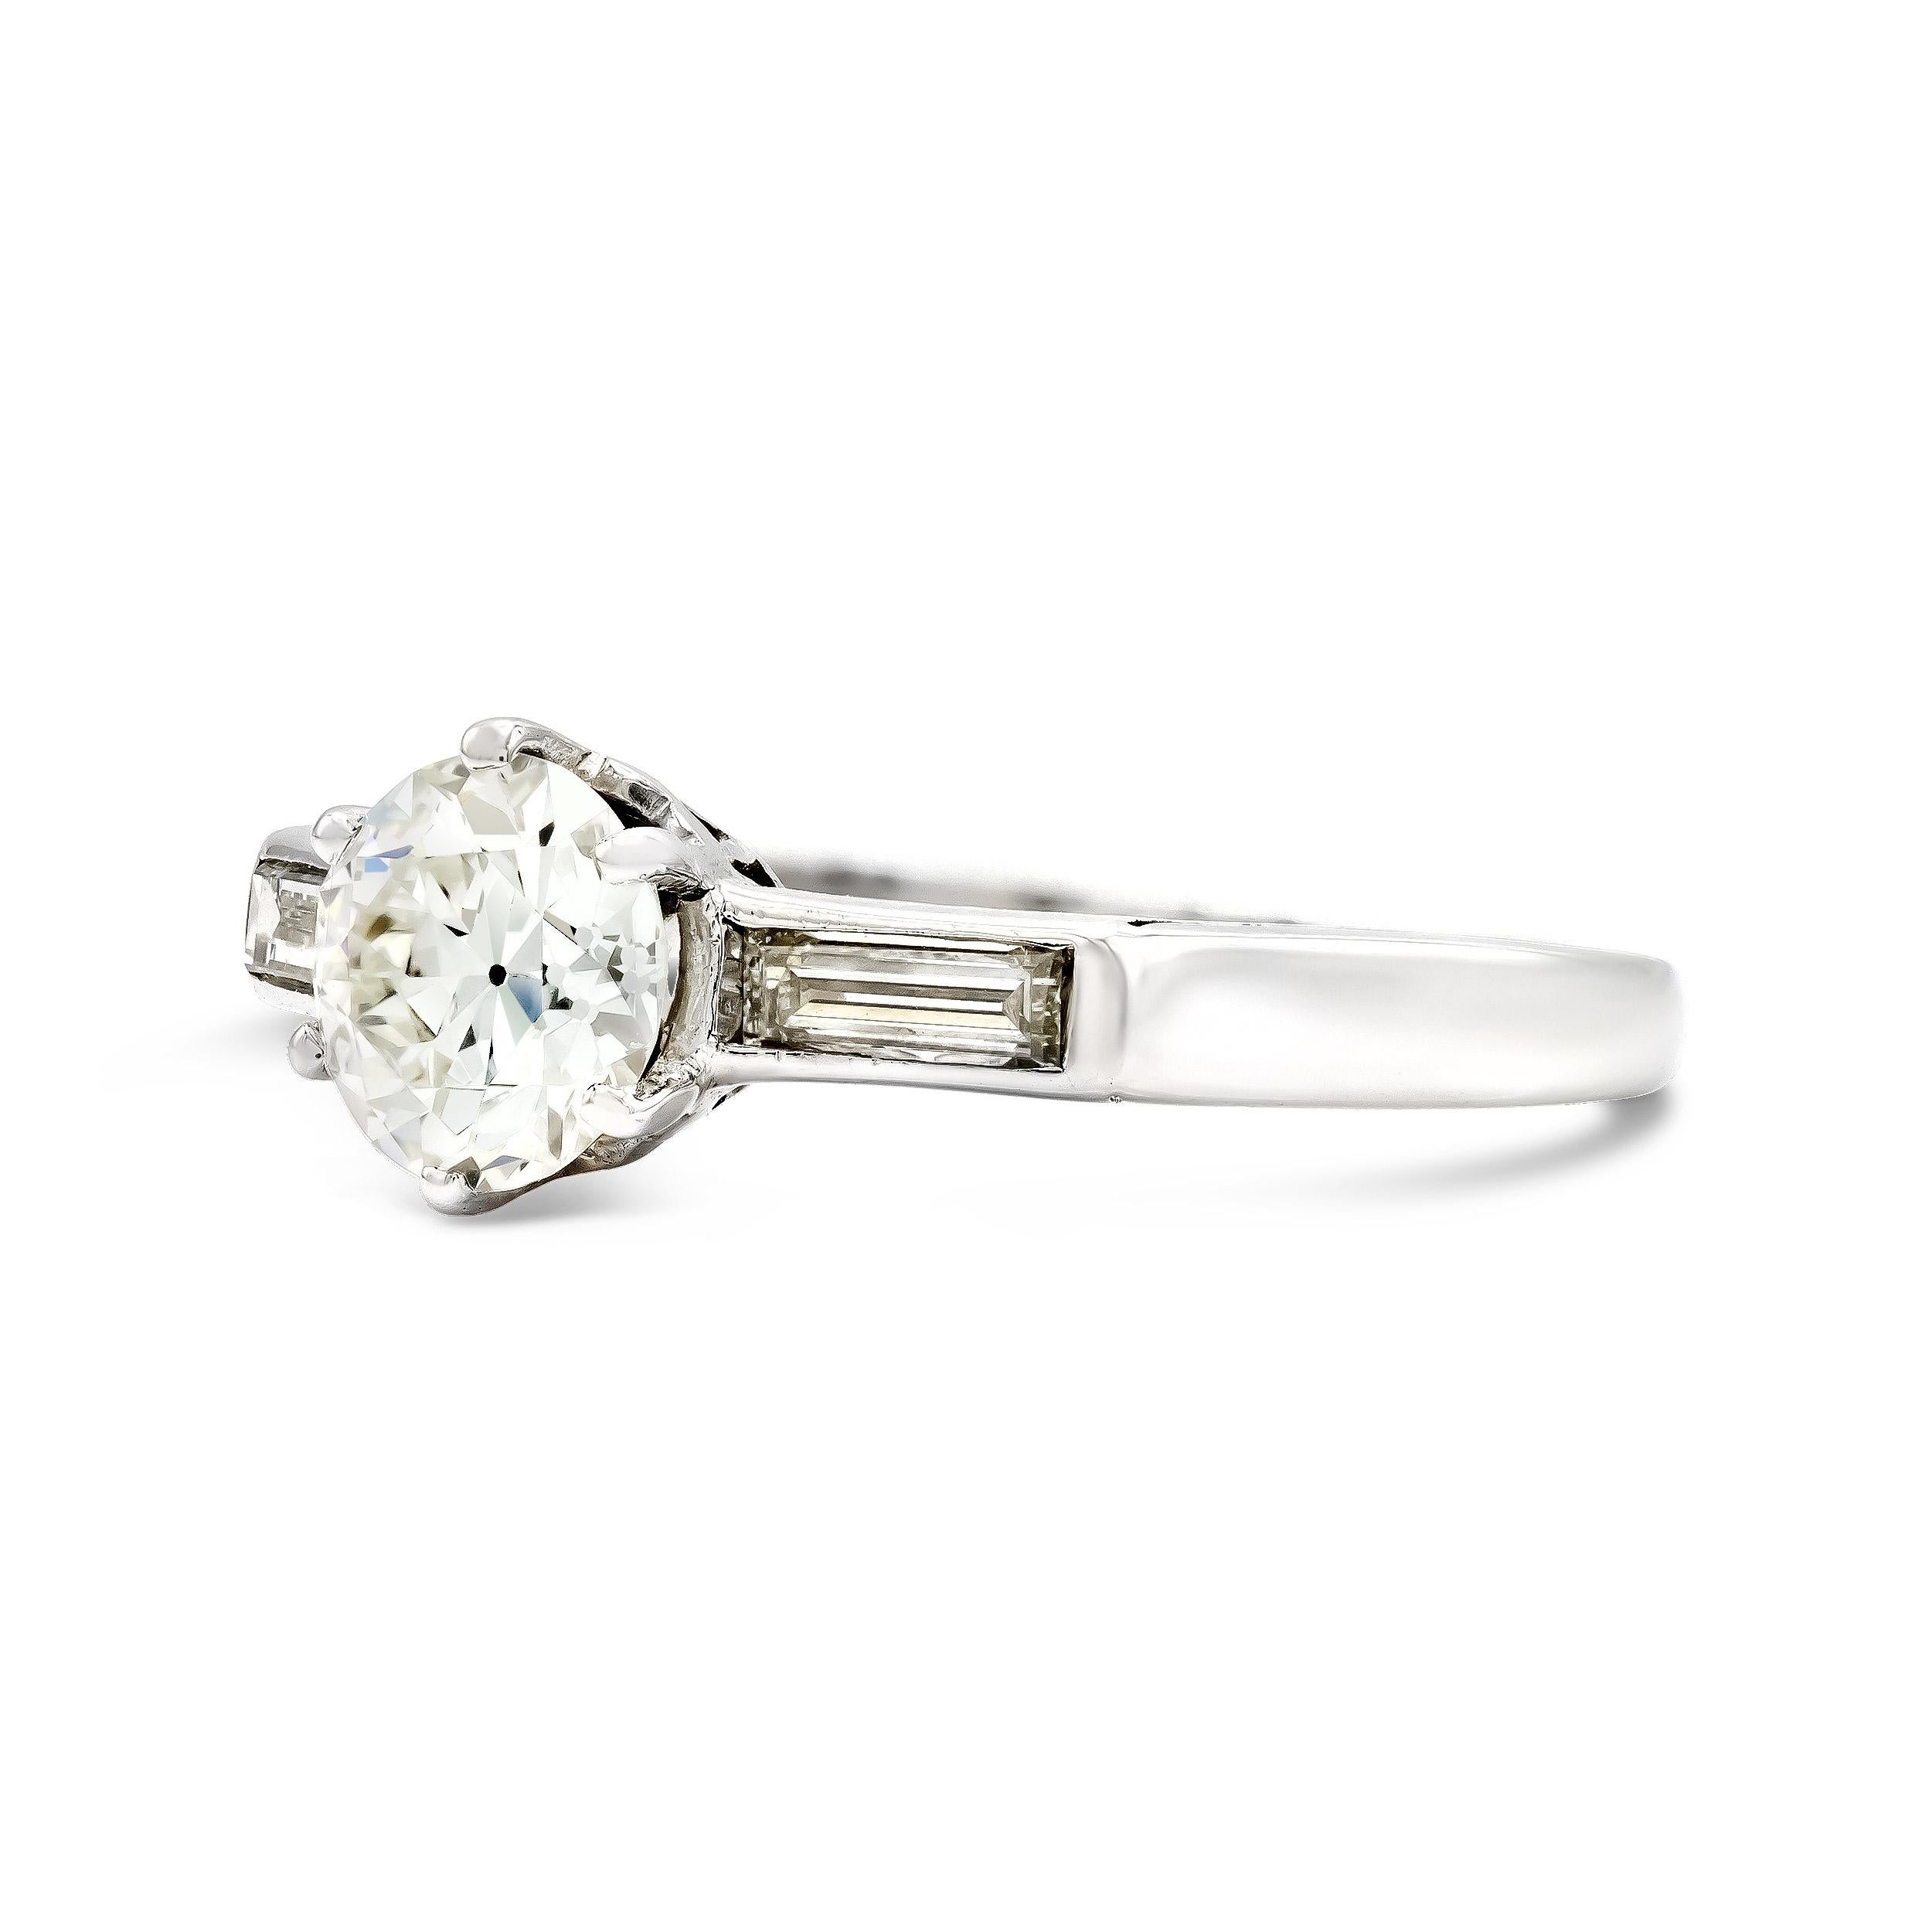 There are few engagement ring styles more classic than this. An antique diamond weighing just a hair under 1 carat centers this vintage engagement ring. We love the sleek six-prong platinum look. Shouldered by two channel-set long and lean straight